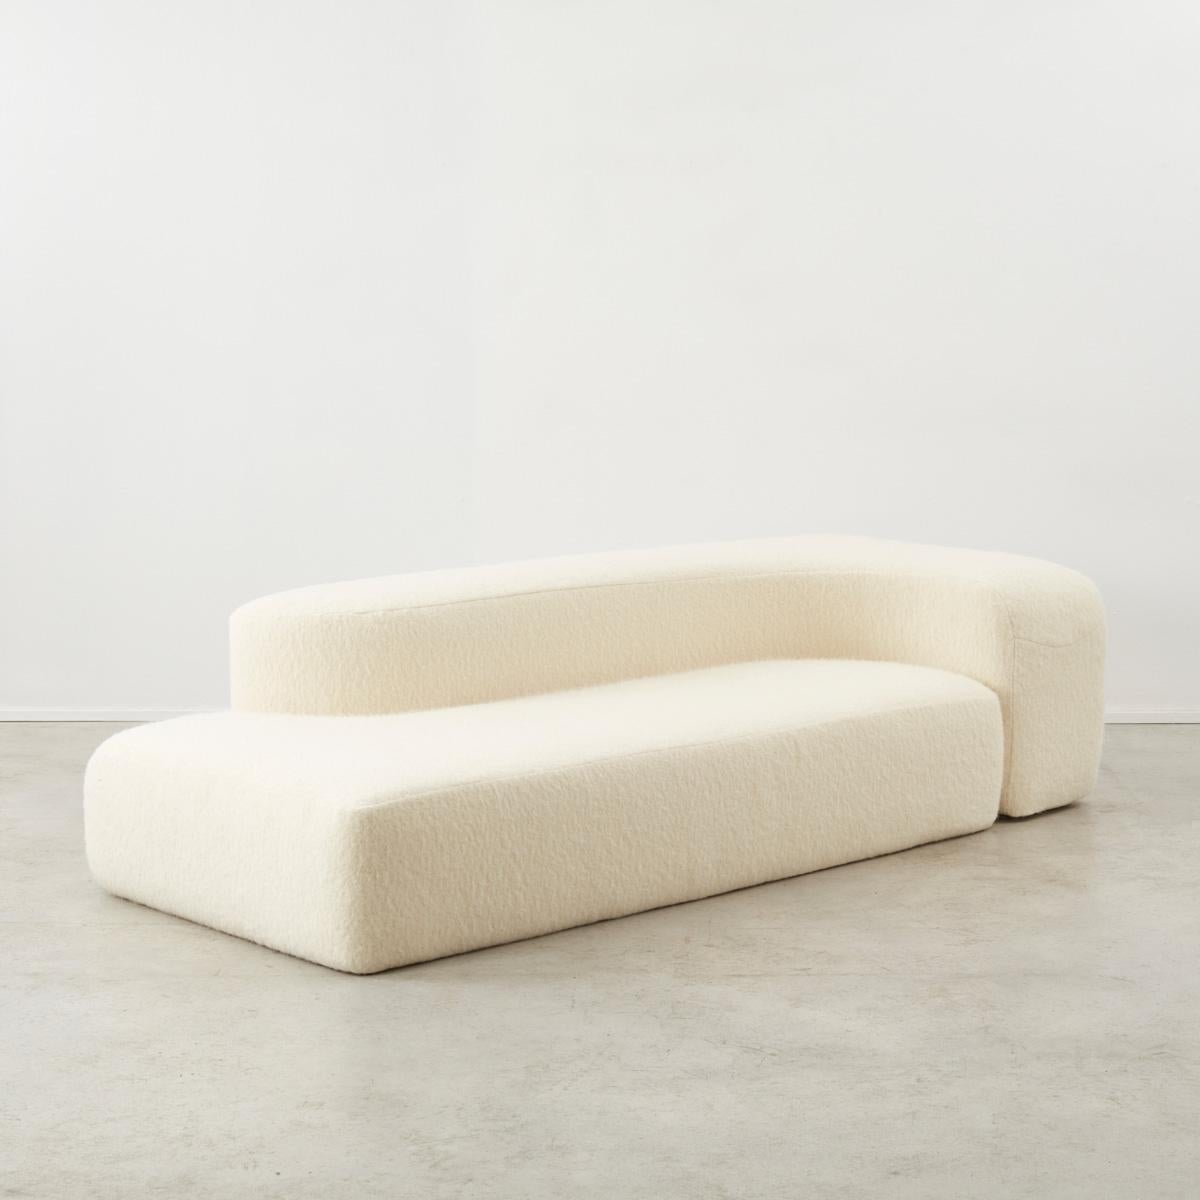 This two-part modular sofa was designed by Ennio Chiggio (1938-2020) for Nikol Internazionale in the 1970s. The sofa creates a shell-like environment that cocoons the sitter.

In good condition. Recently reupholstered in a natural yet luxurious